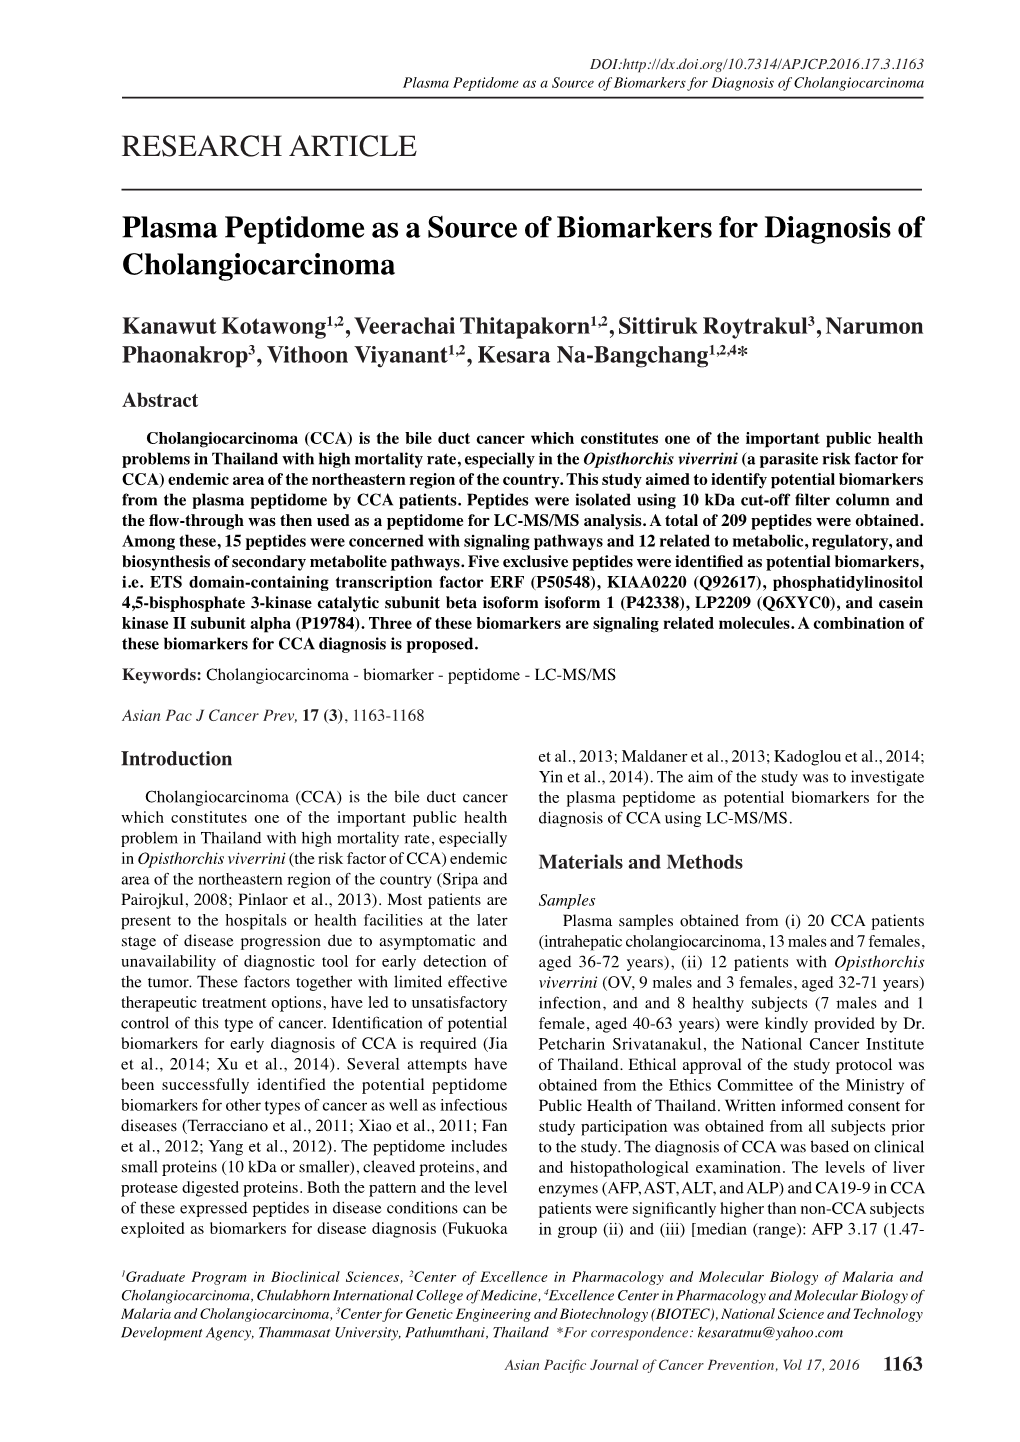 Plasma Peptidome As a Source of Biomarkers for Diagnosis of Cholangiocarcinoma